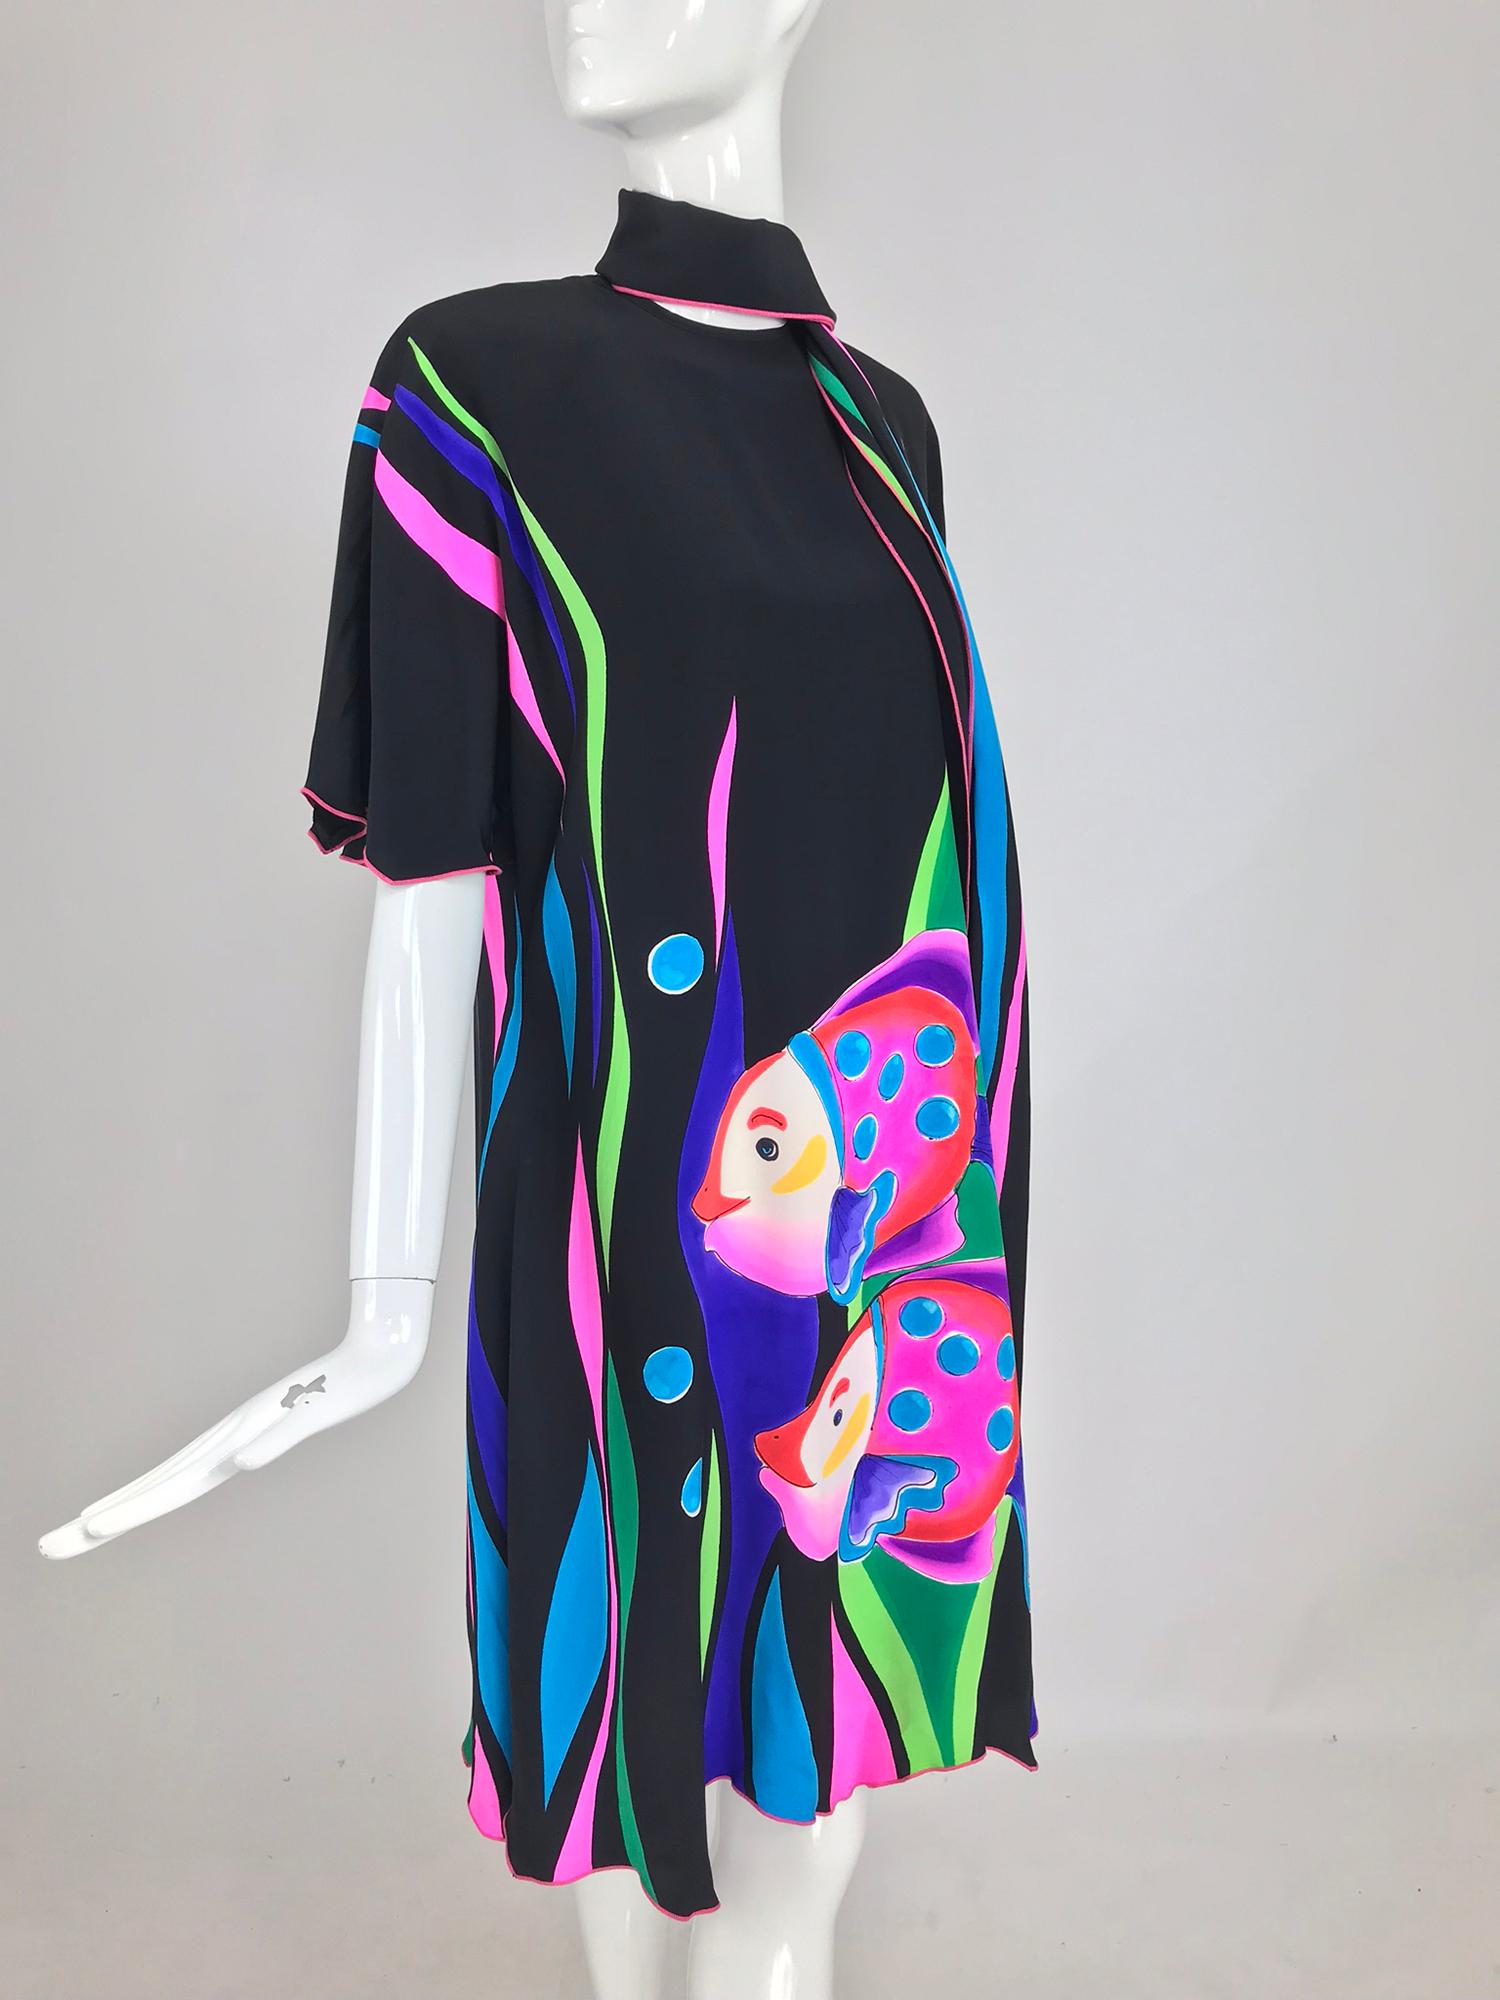 Yolanda Lorente Hand Painted Silk Dress with Fish. Black silk hand painted shift dress with a happy fish at the front and back in brilliant colours. Fluttery elbow length sleeves are finished in hot pink stitching. The full dress has a saw tooth hem